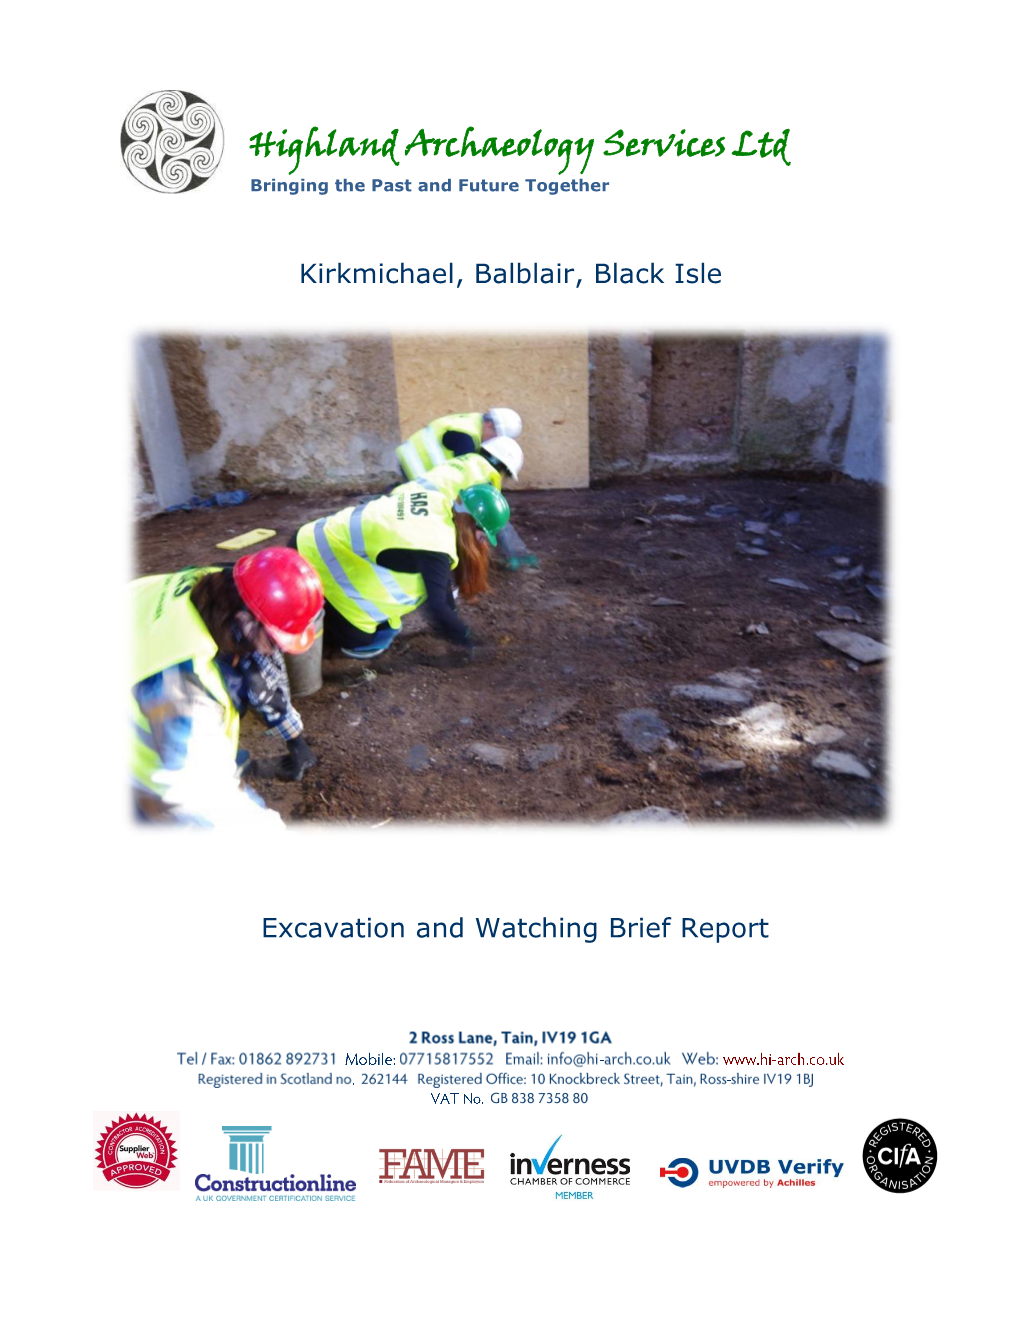 Excavation and Watching Brief Report